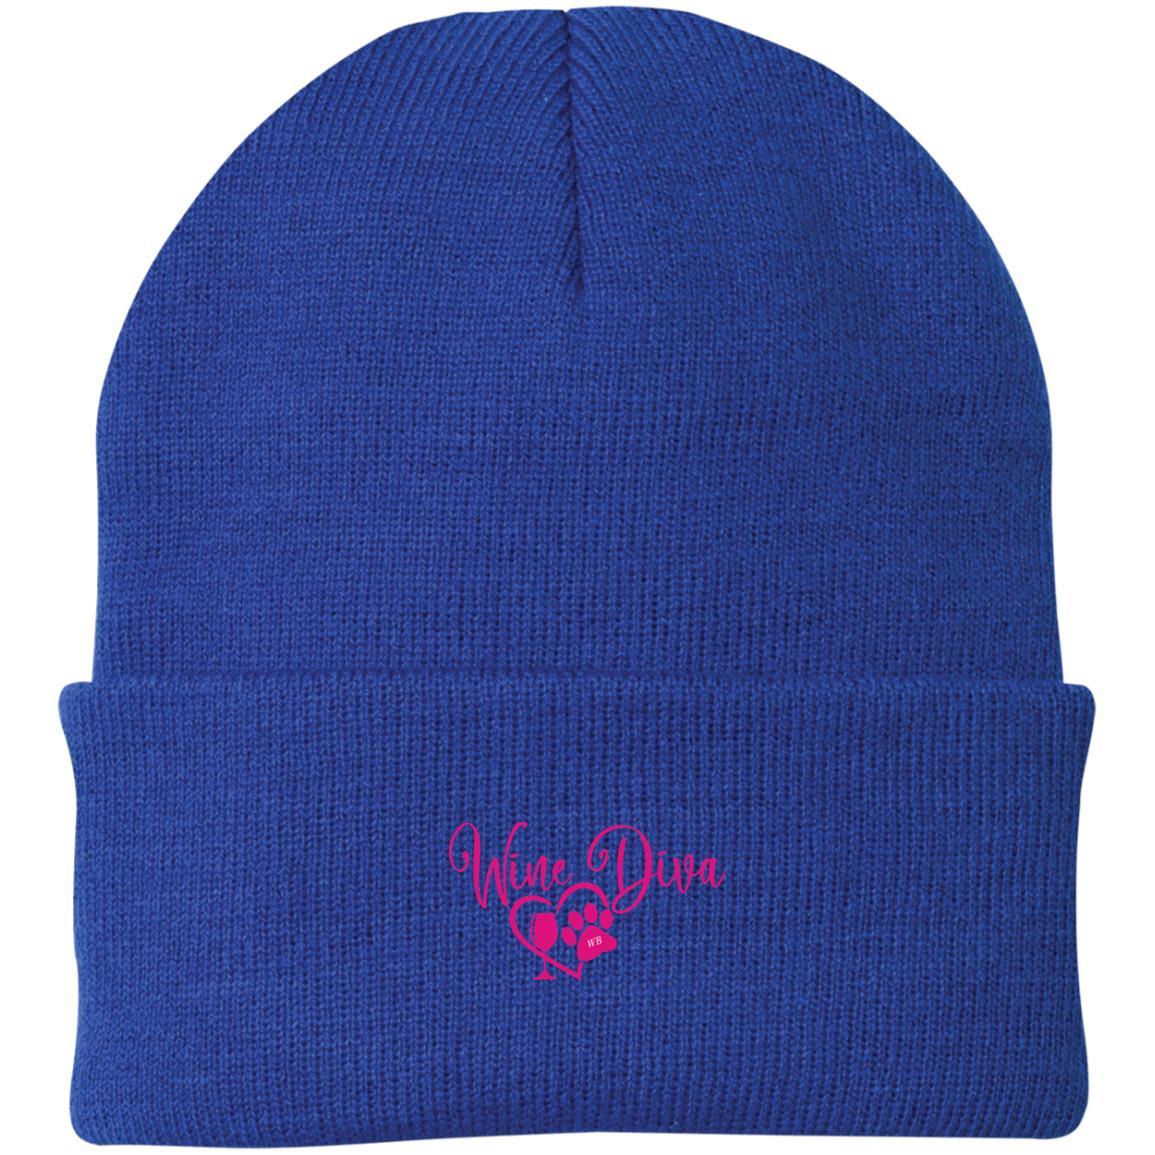 Hats Athletic Royal / One Size Winey Bitches Co "Wine Diva" Embroidered Knit Cap WineyBitchesCo